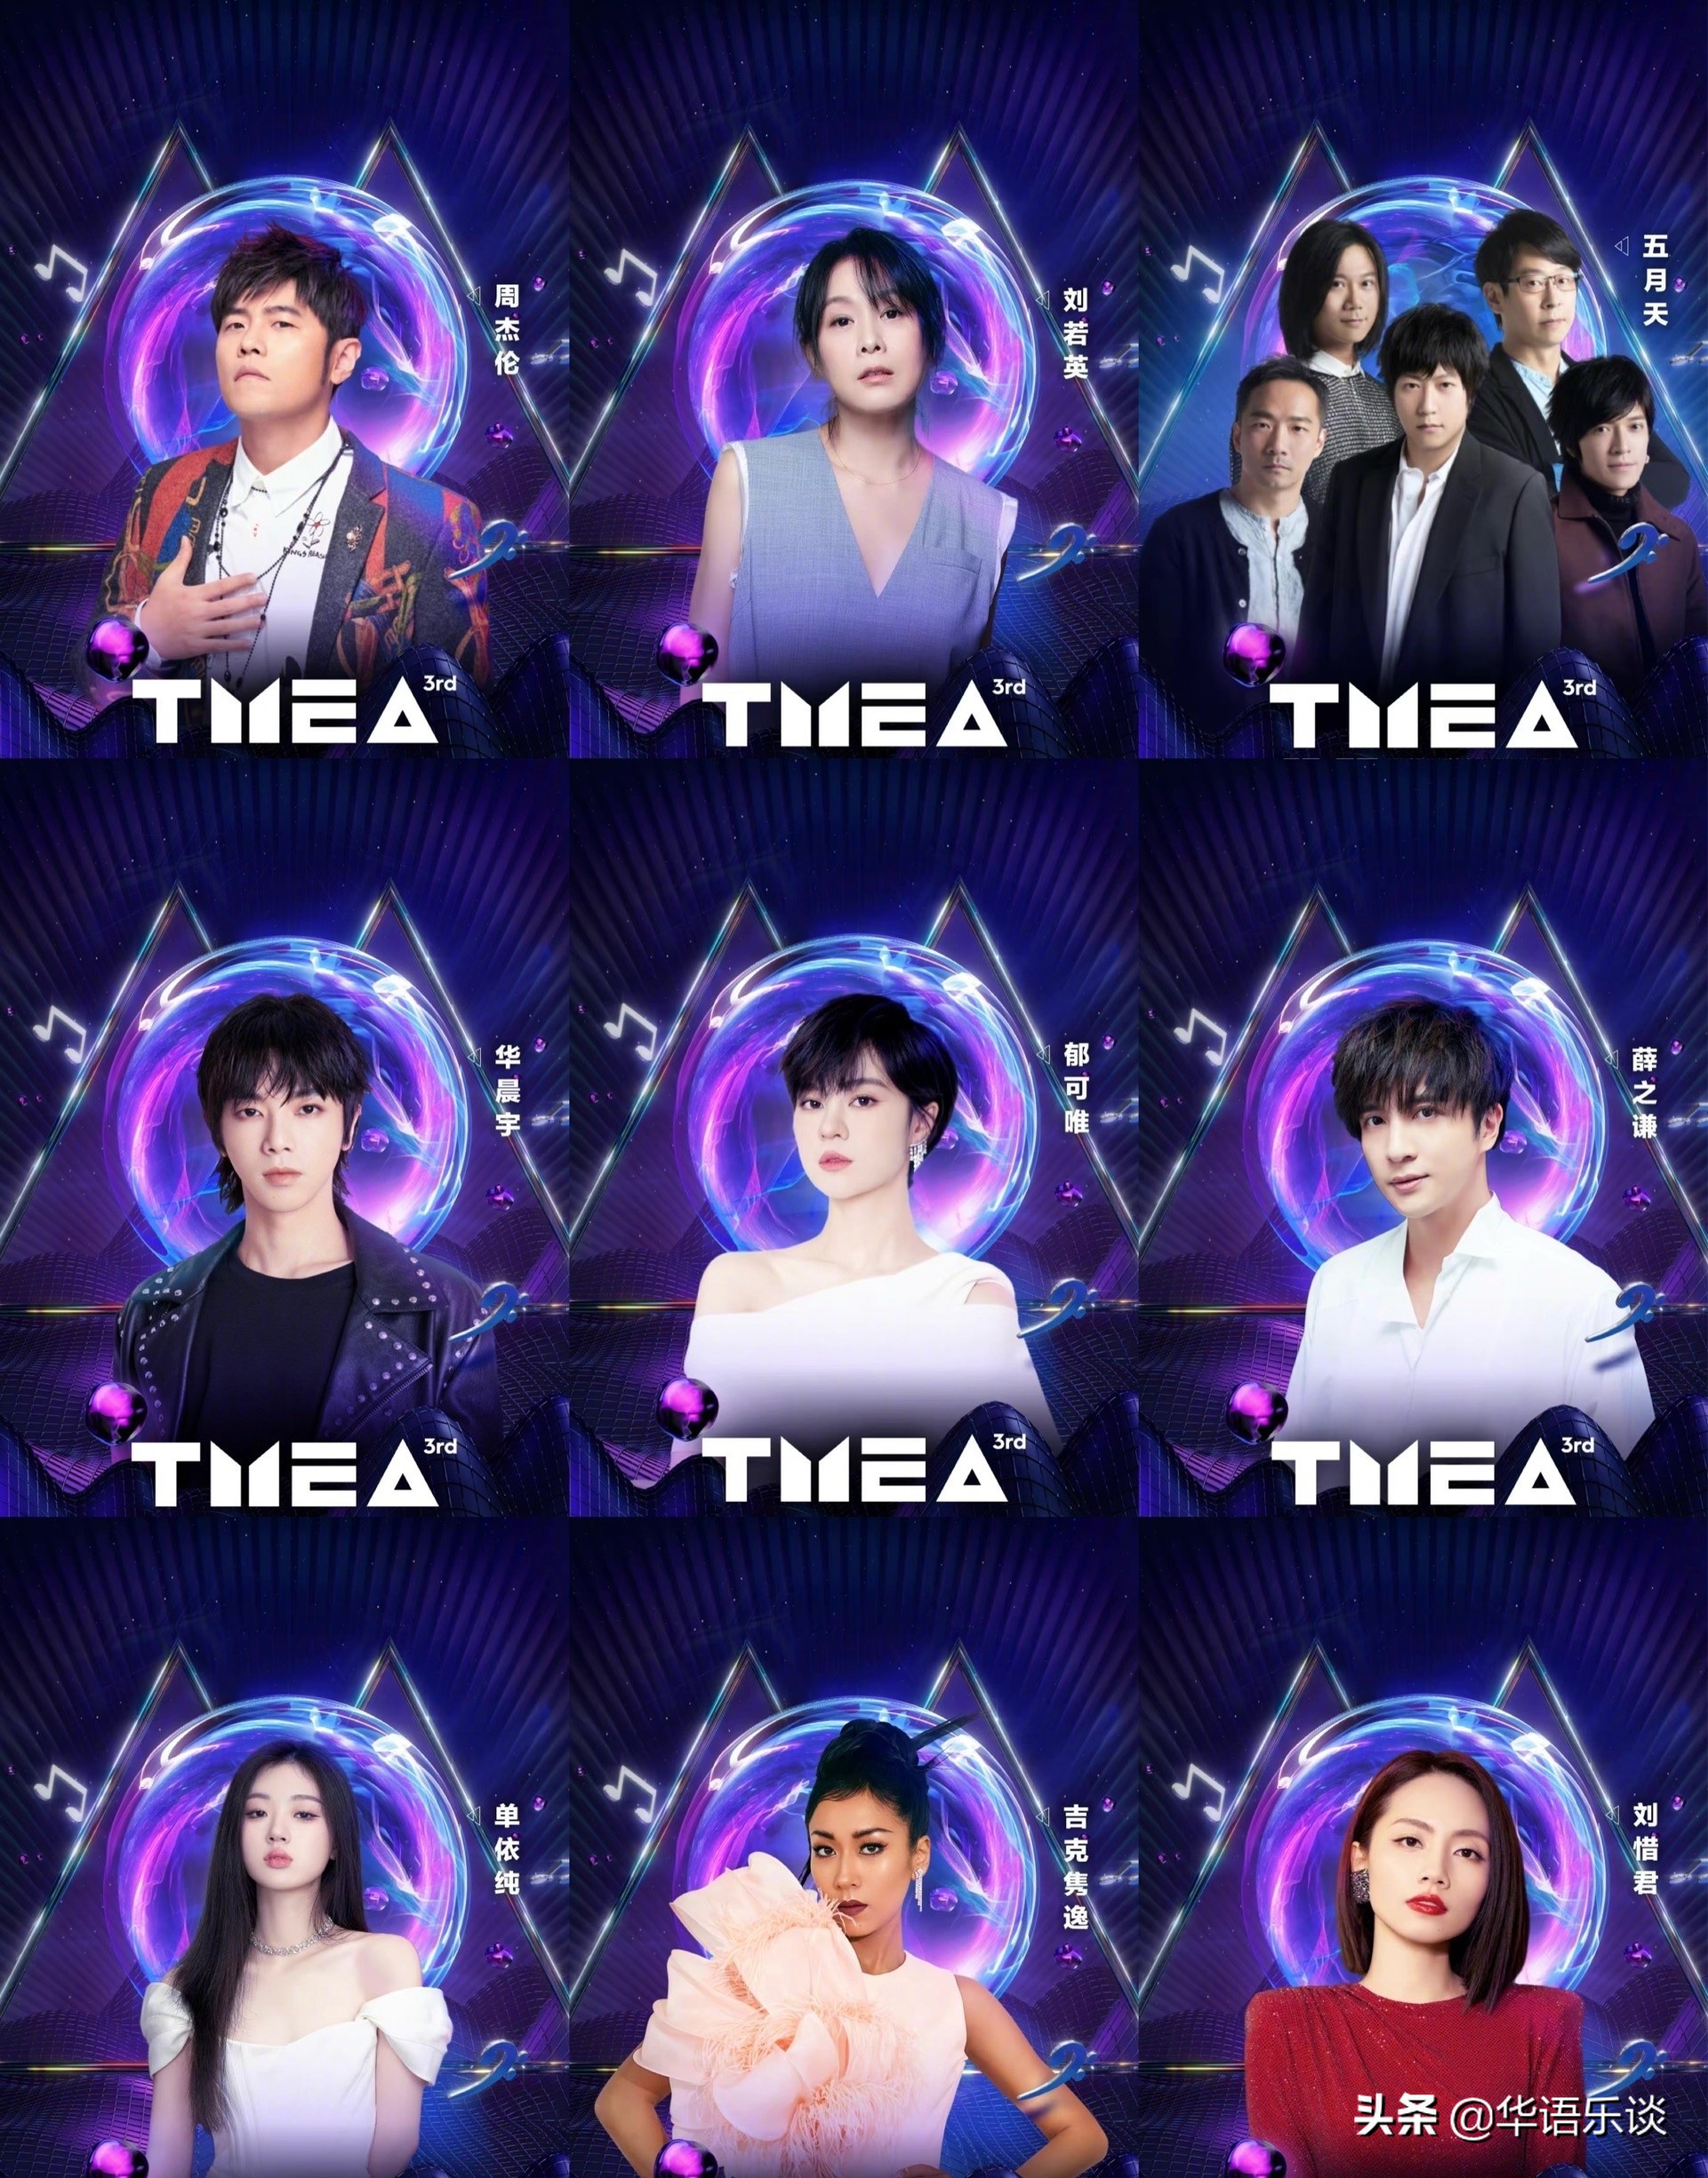 TMEA Entertainment Festival, Hua Chenyu's first attendance is expected